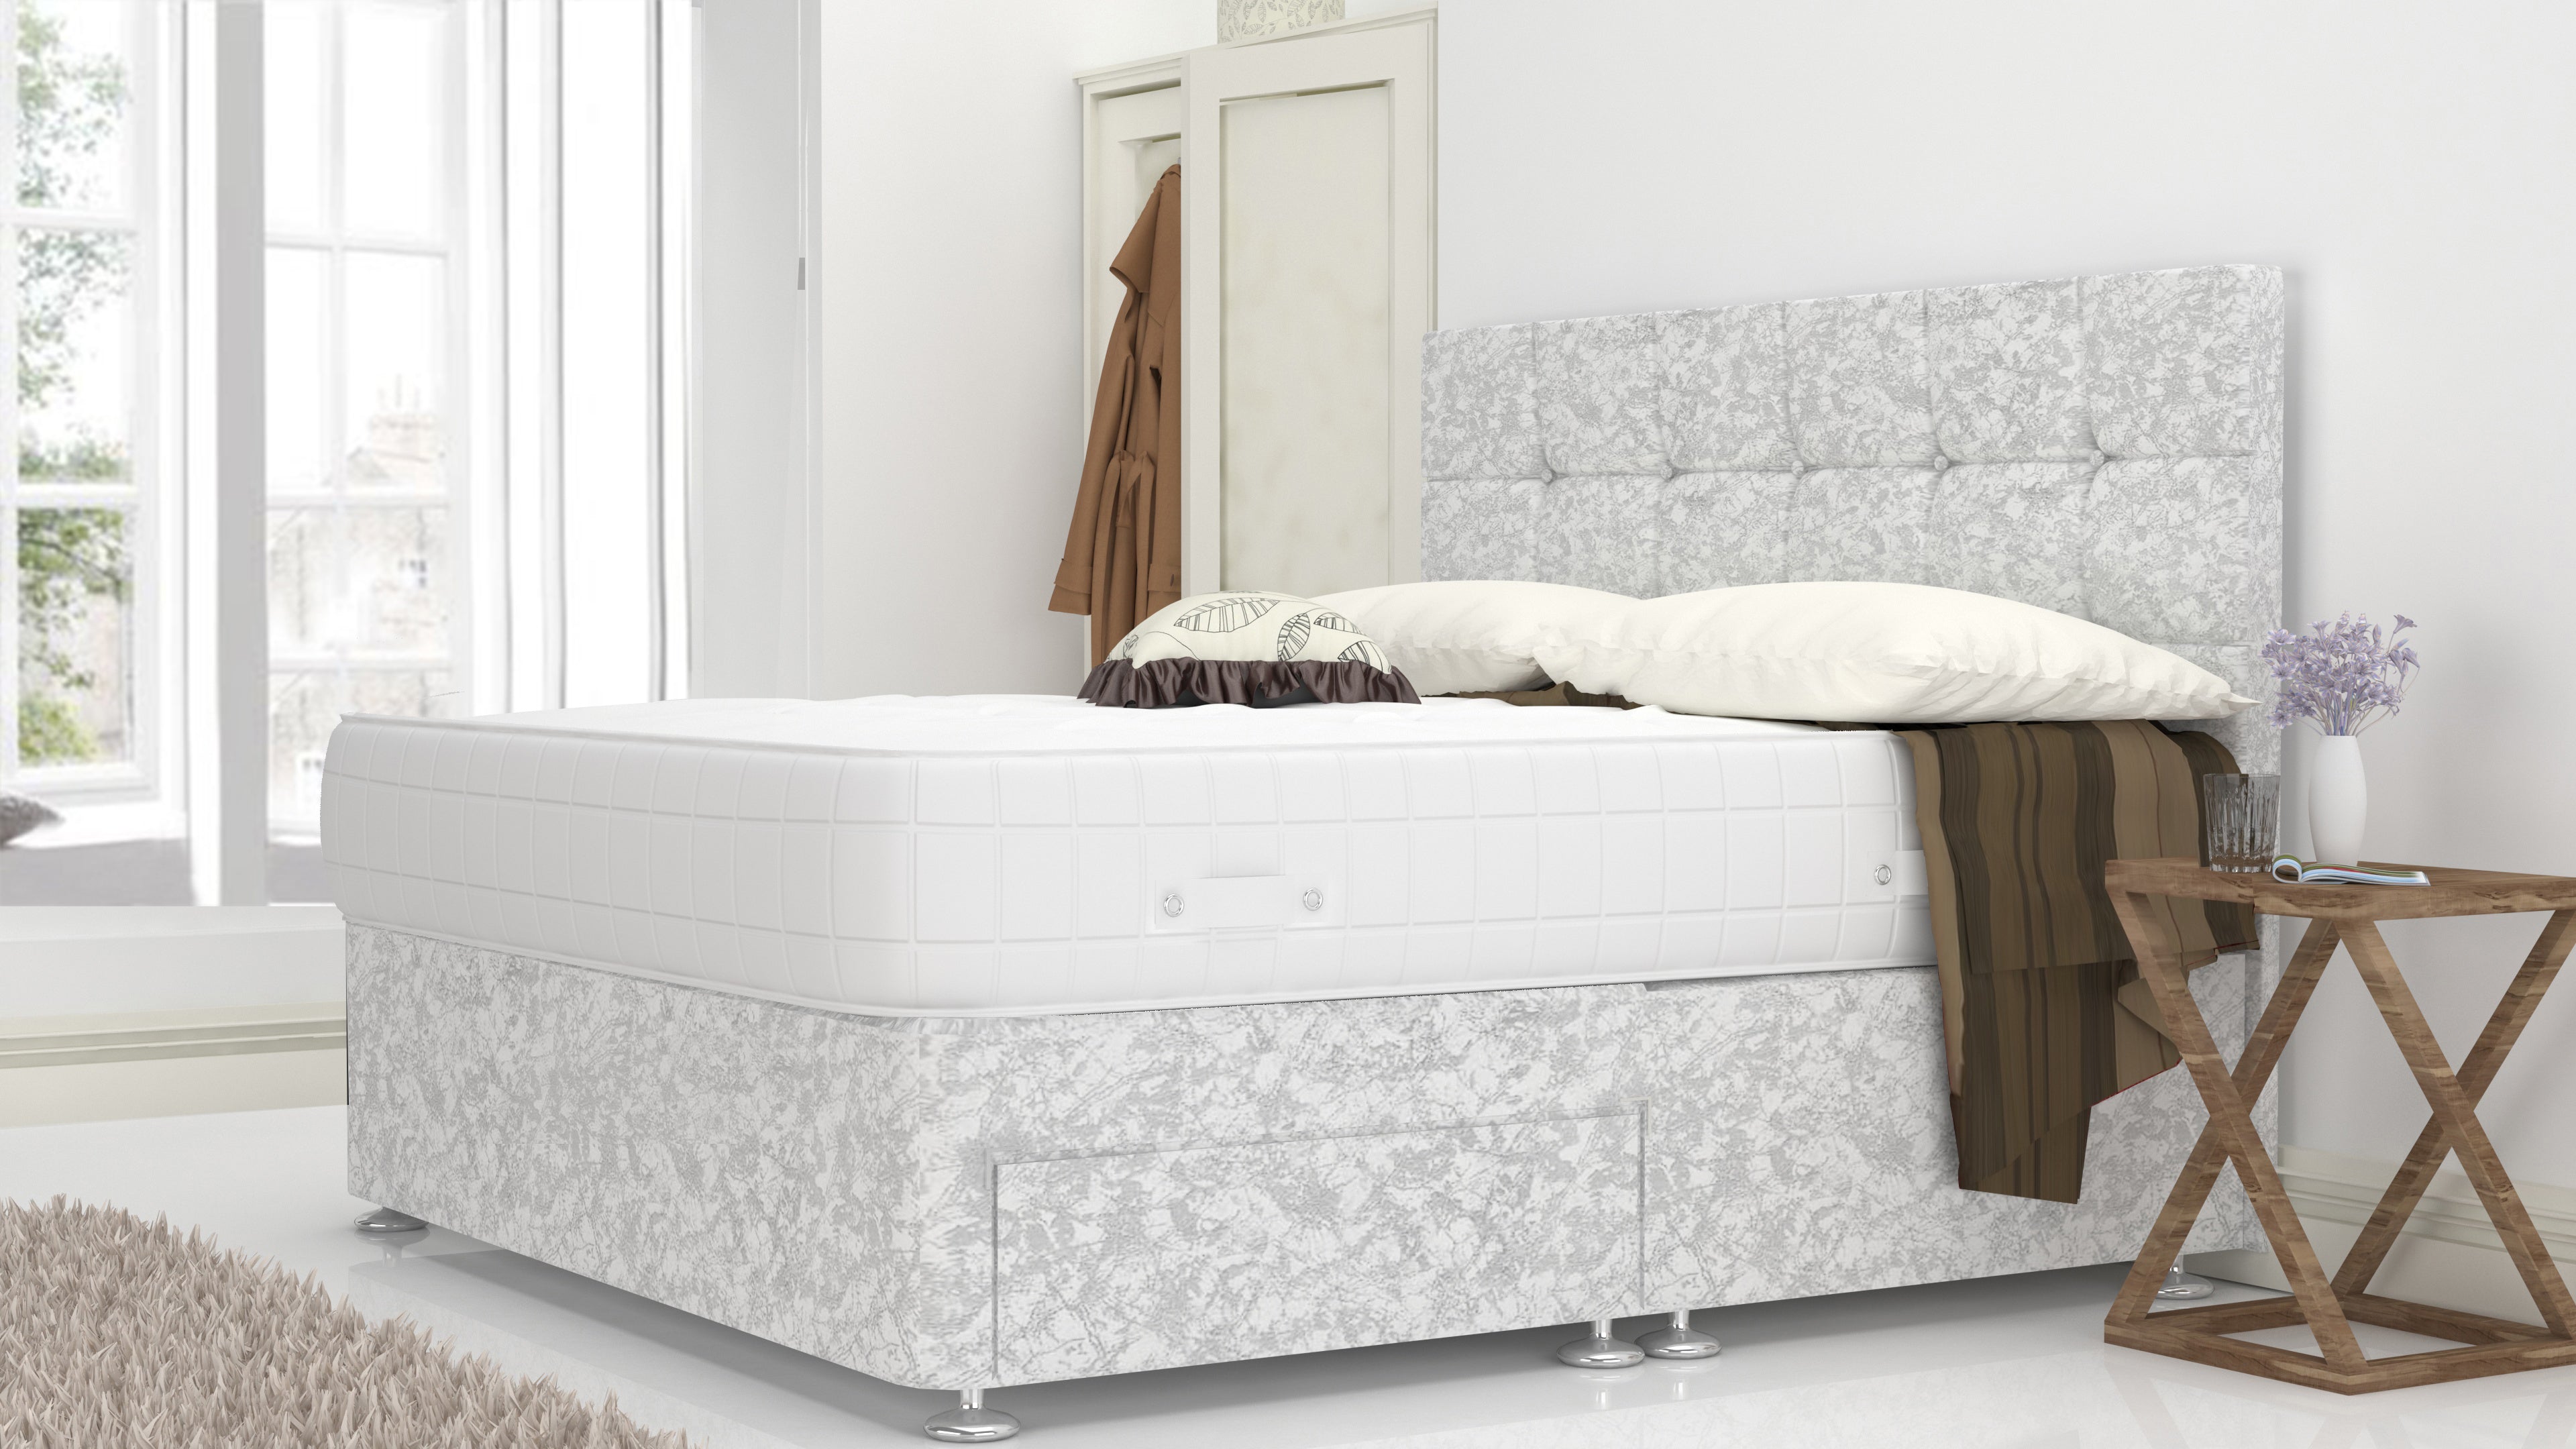 White Crushed Velvet 5 Feet Divan Bed With Cube Headboard (Included Feet) And Free Orthopedic Mattress